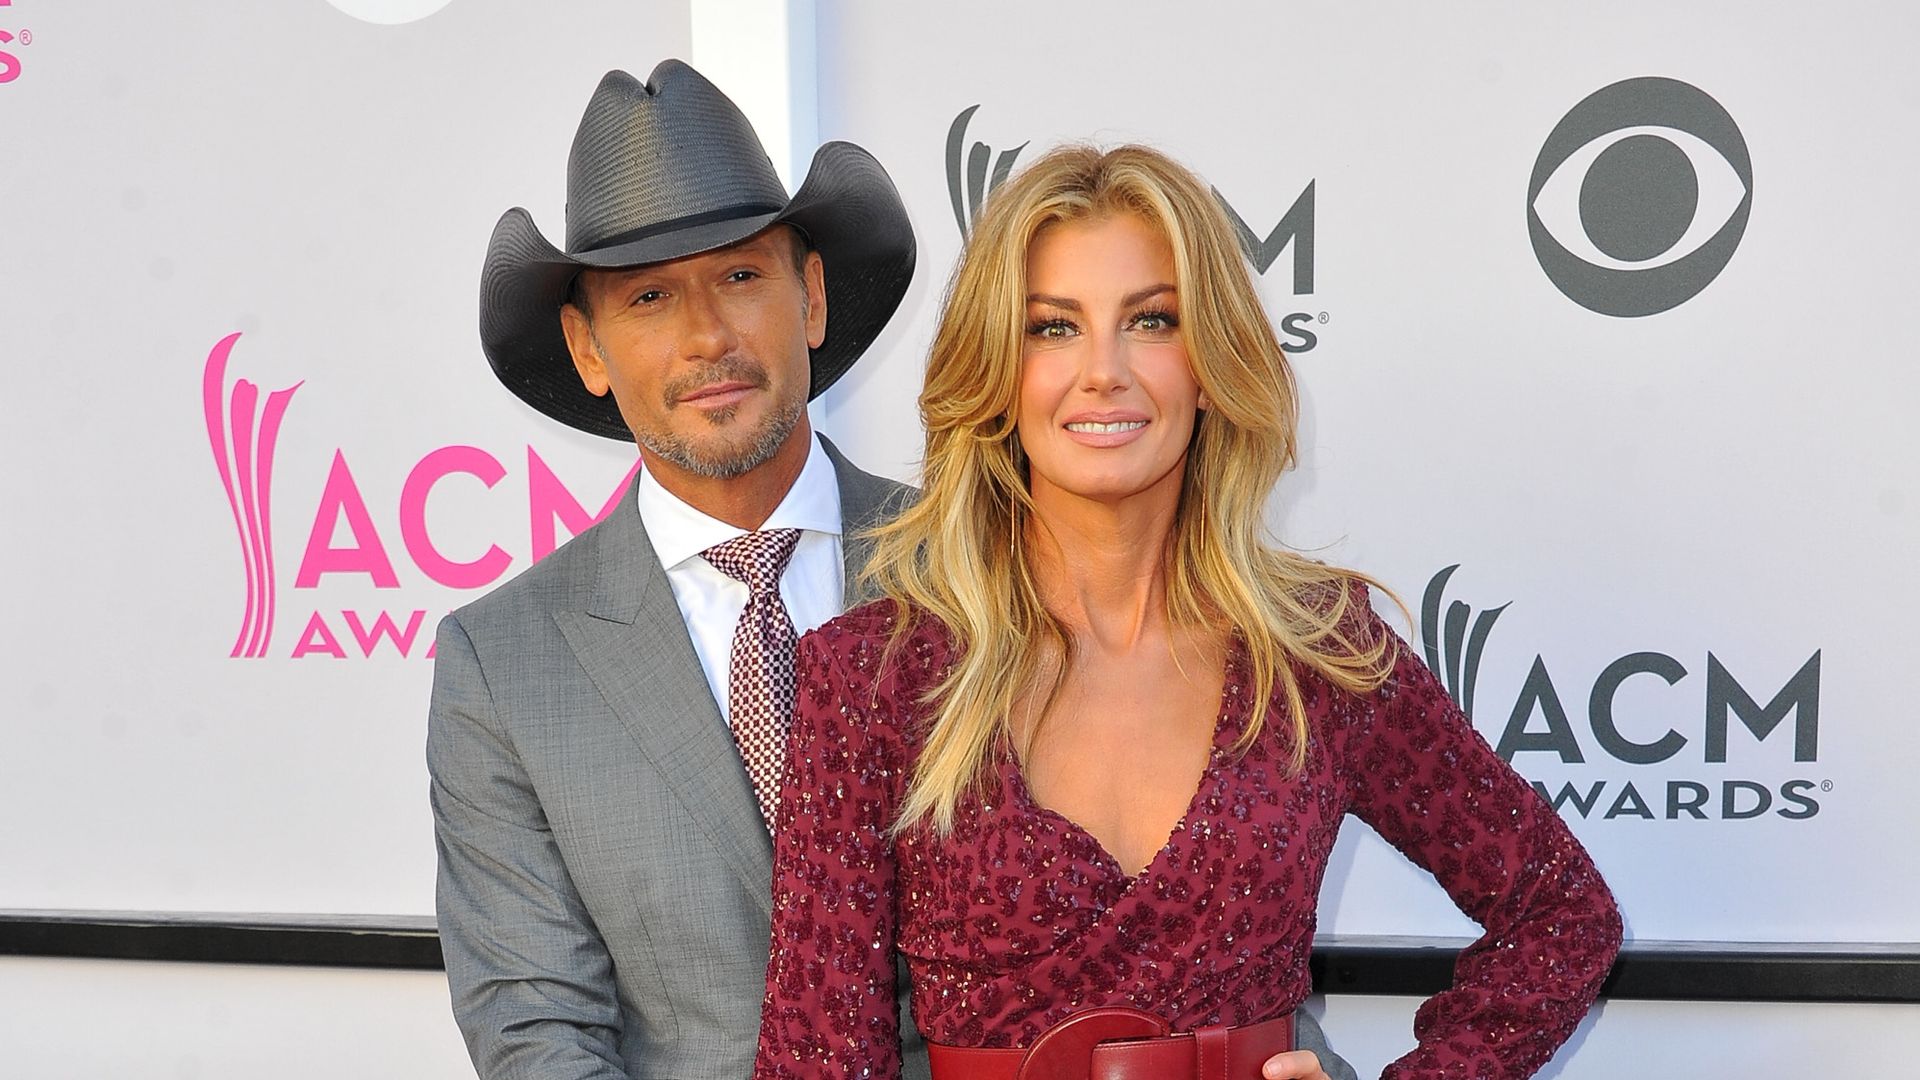 Tim McGraw and Faith Hill arrive at the 52nd Academy Of Country Music Awards